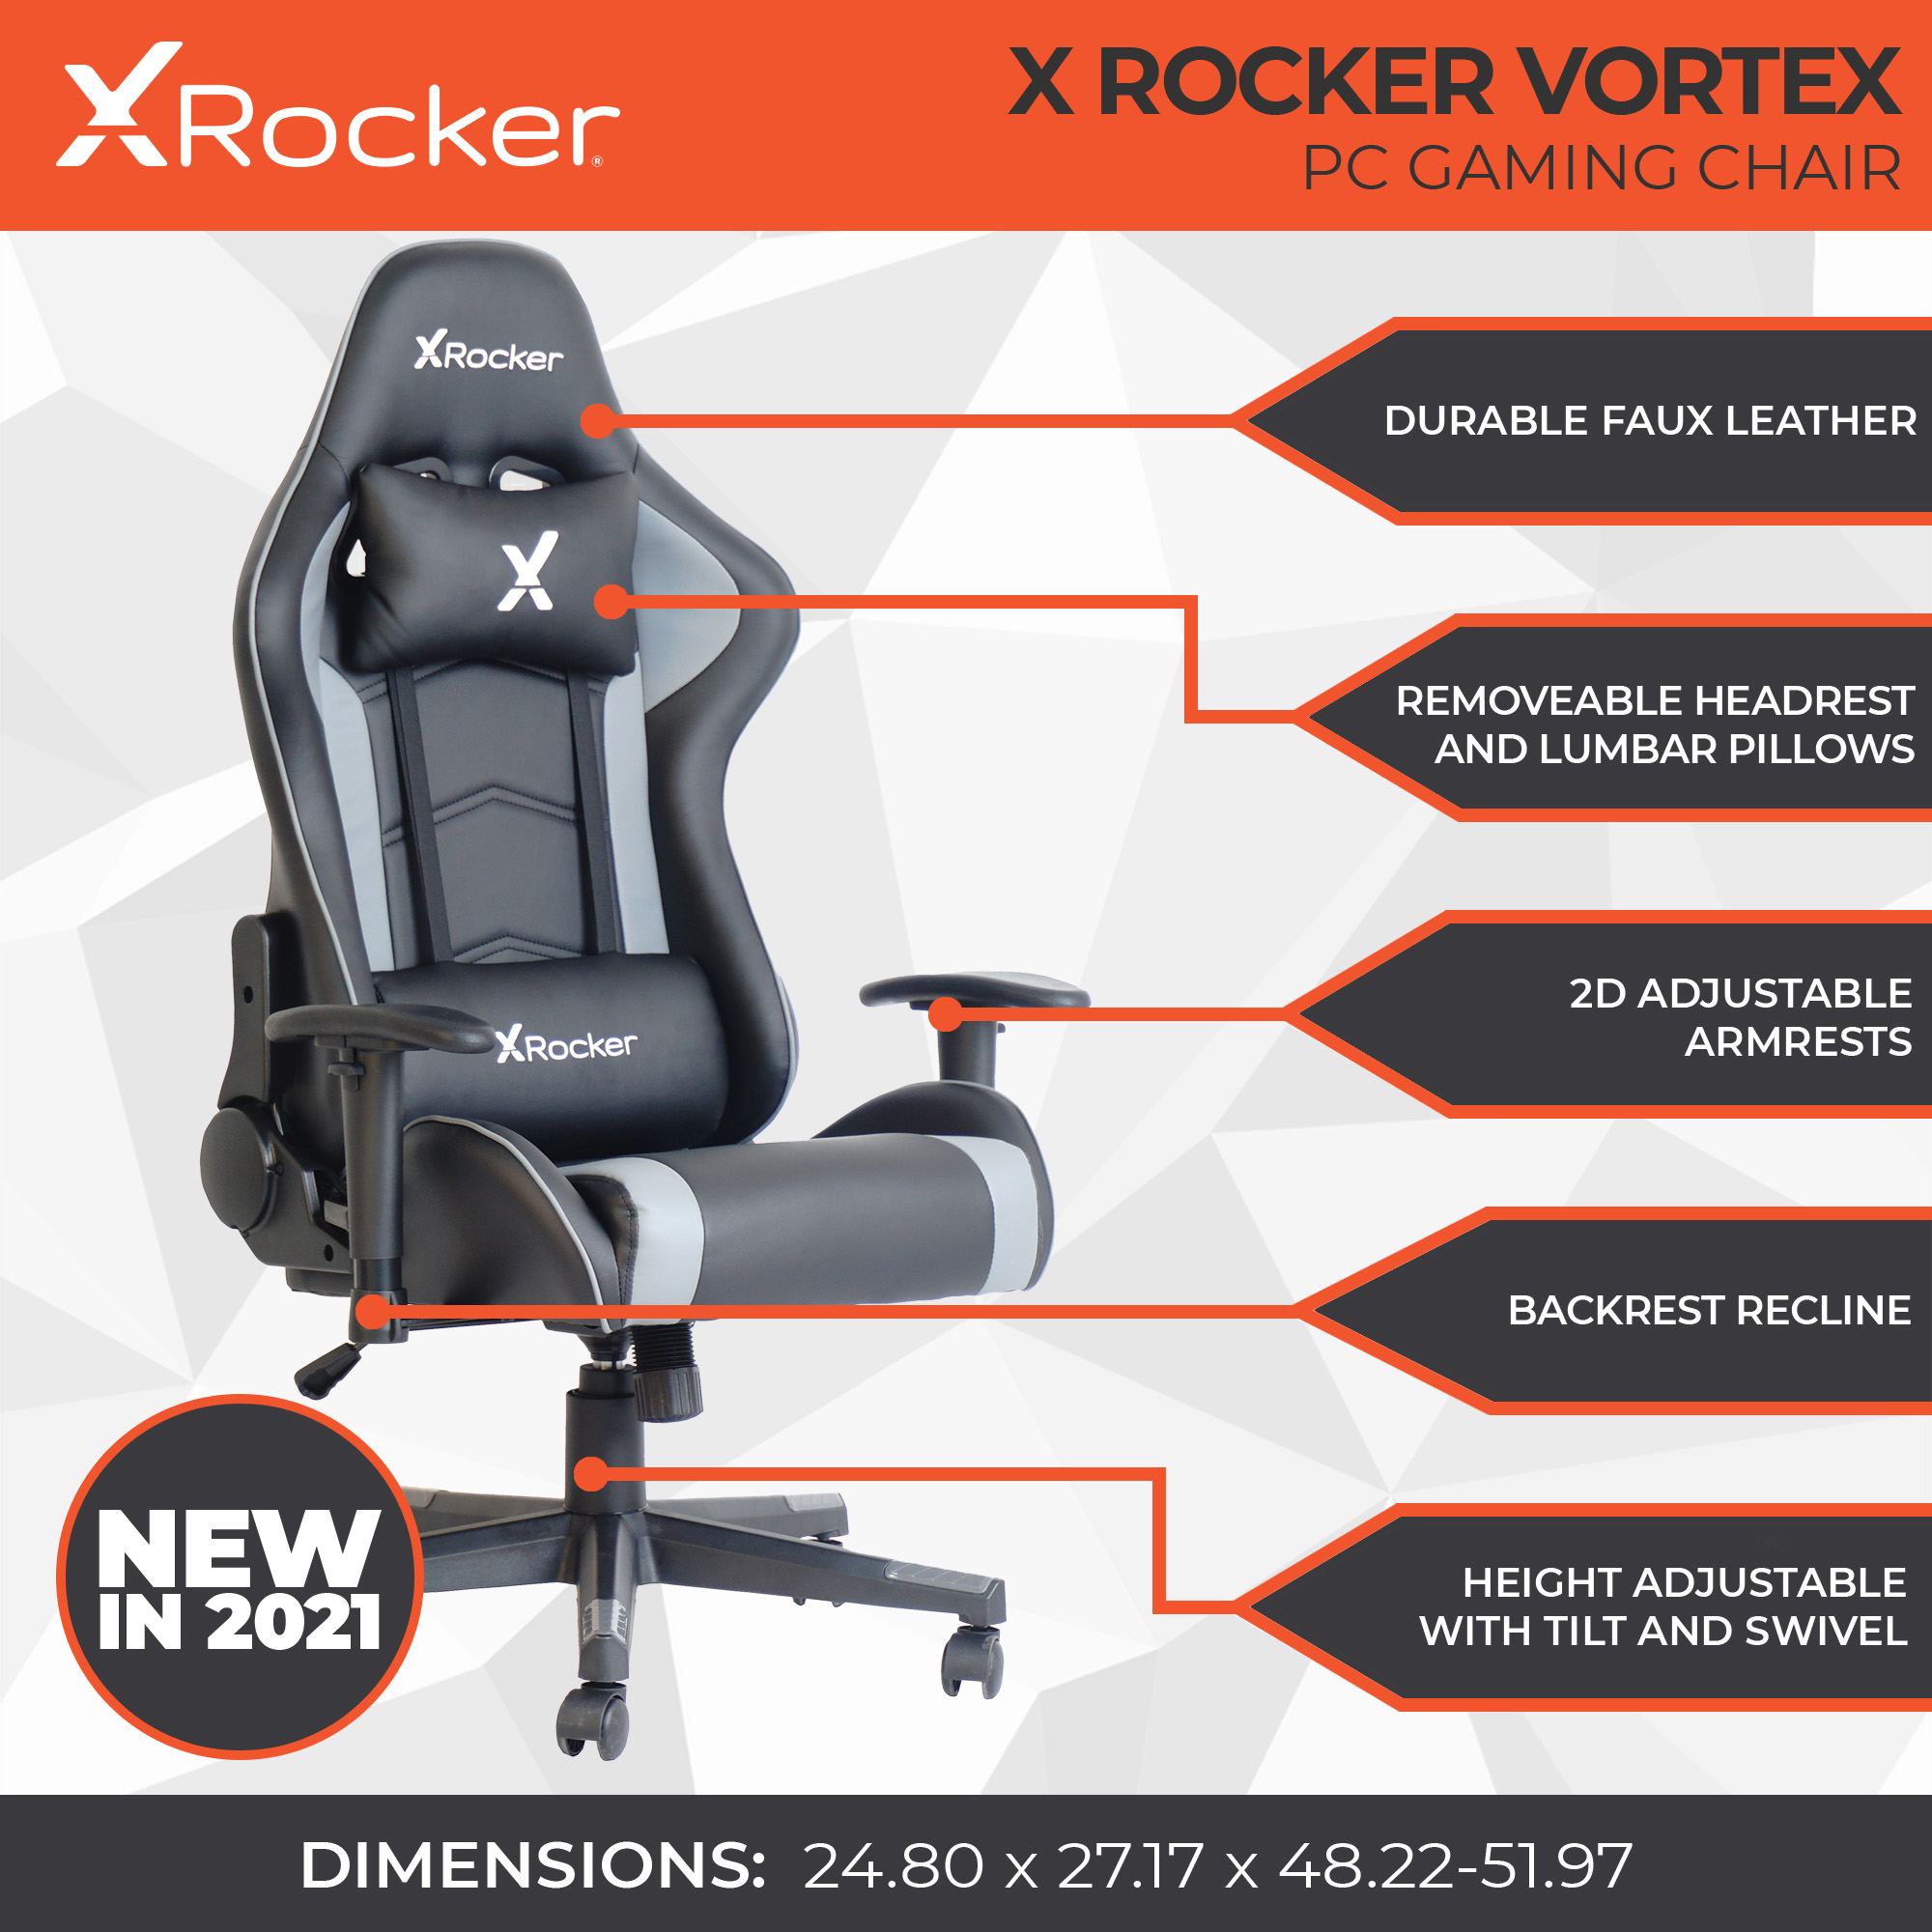 X Rocker Vortex Leather PC Gaming Chair, Black and Gray, 24.8" x 27.17" x 48.22-51.97" - image 2 of 10